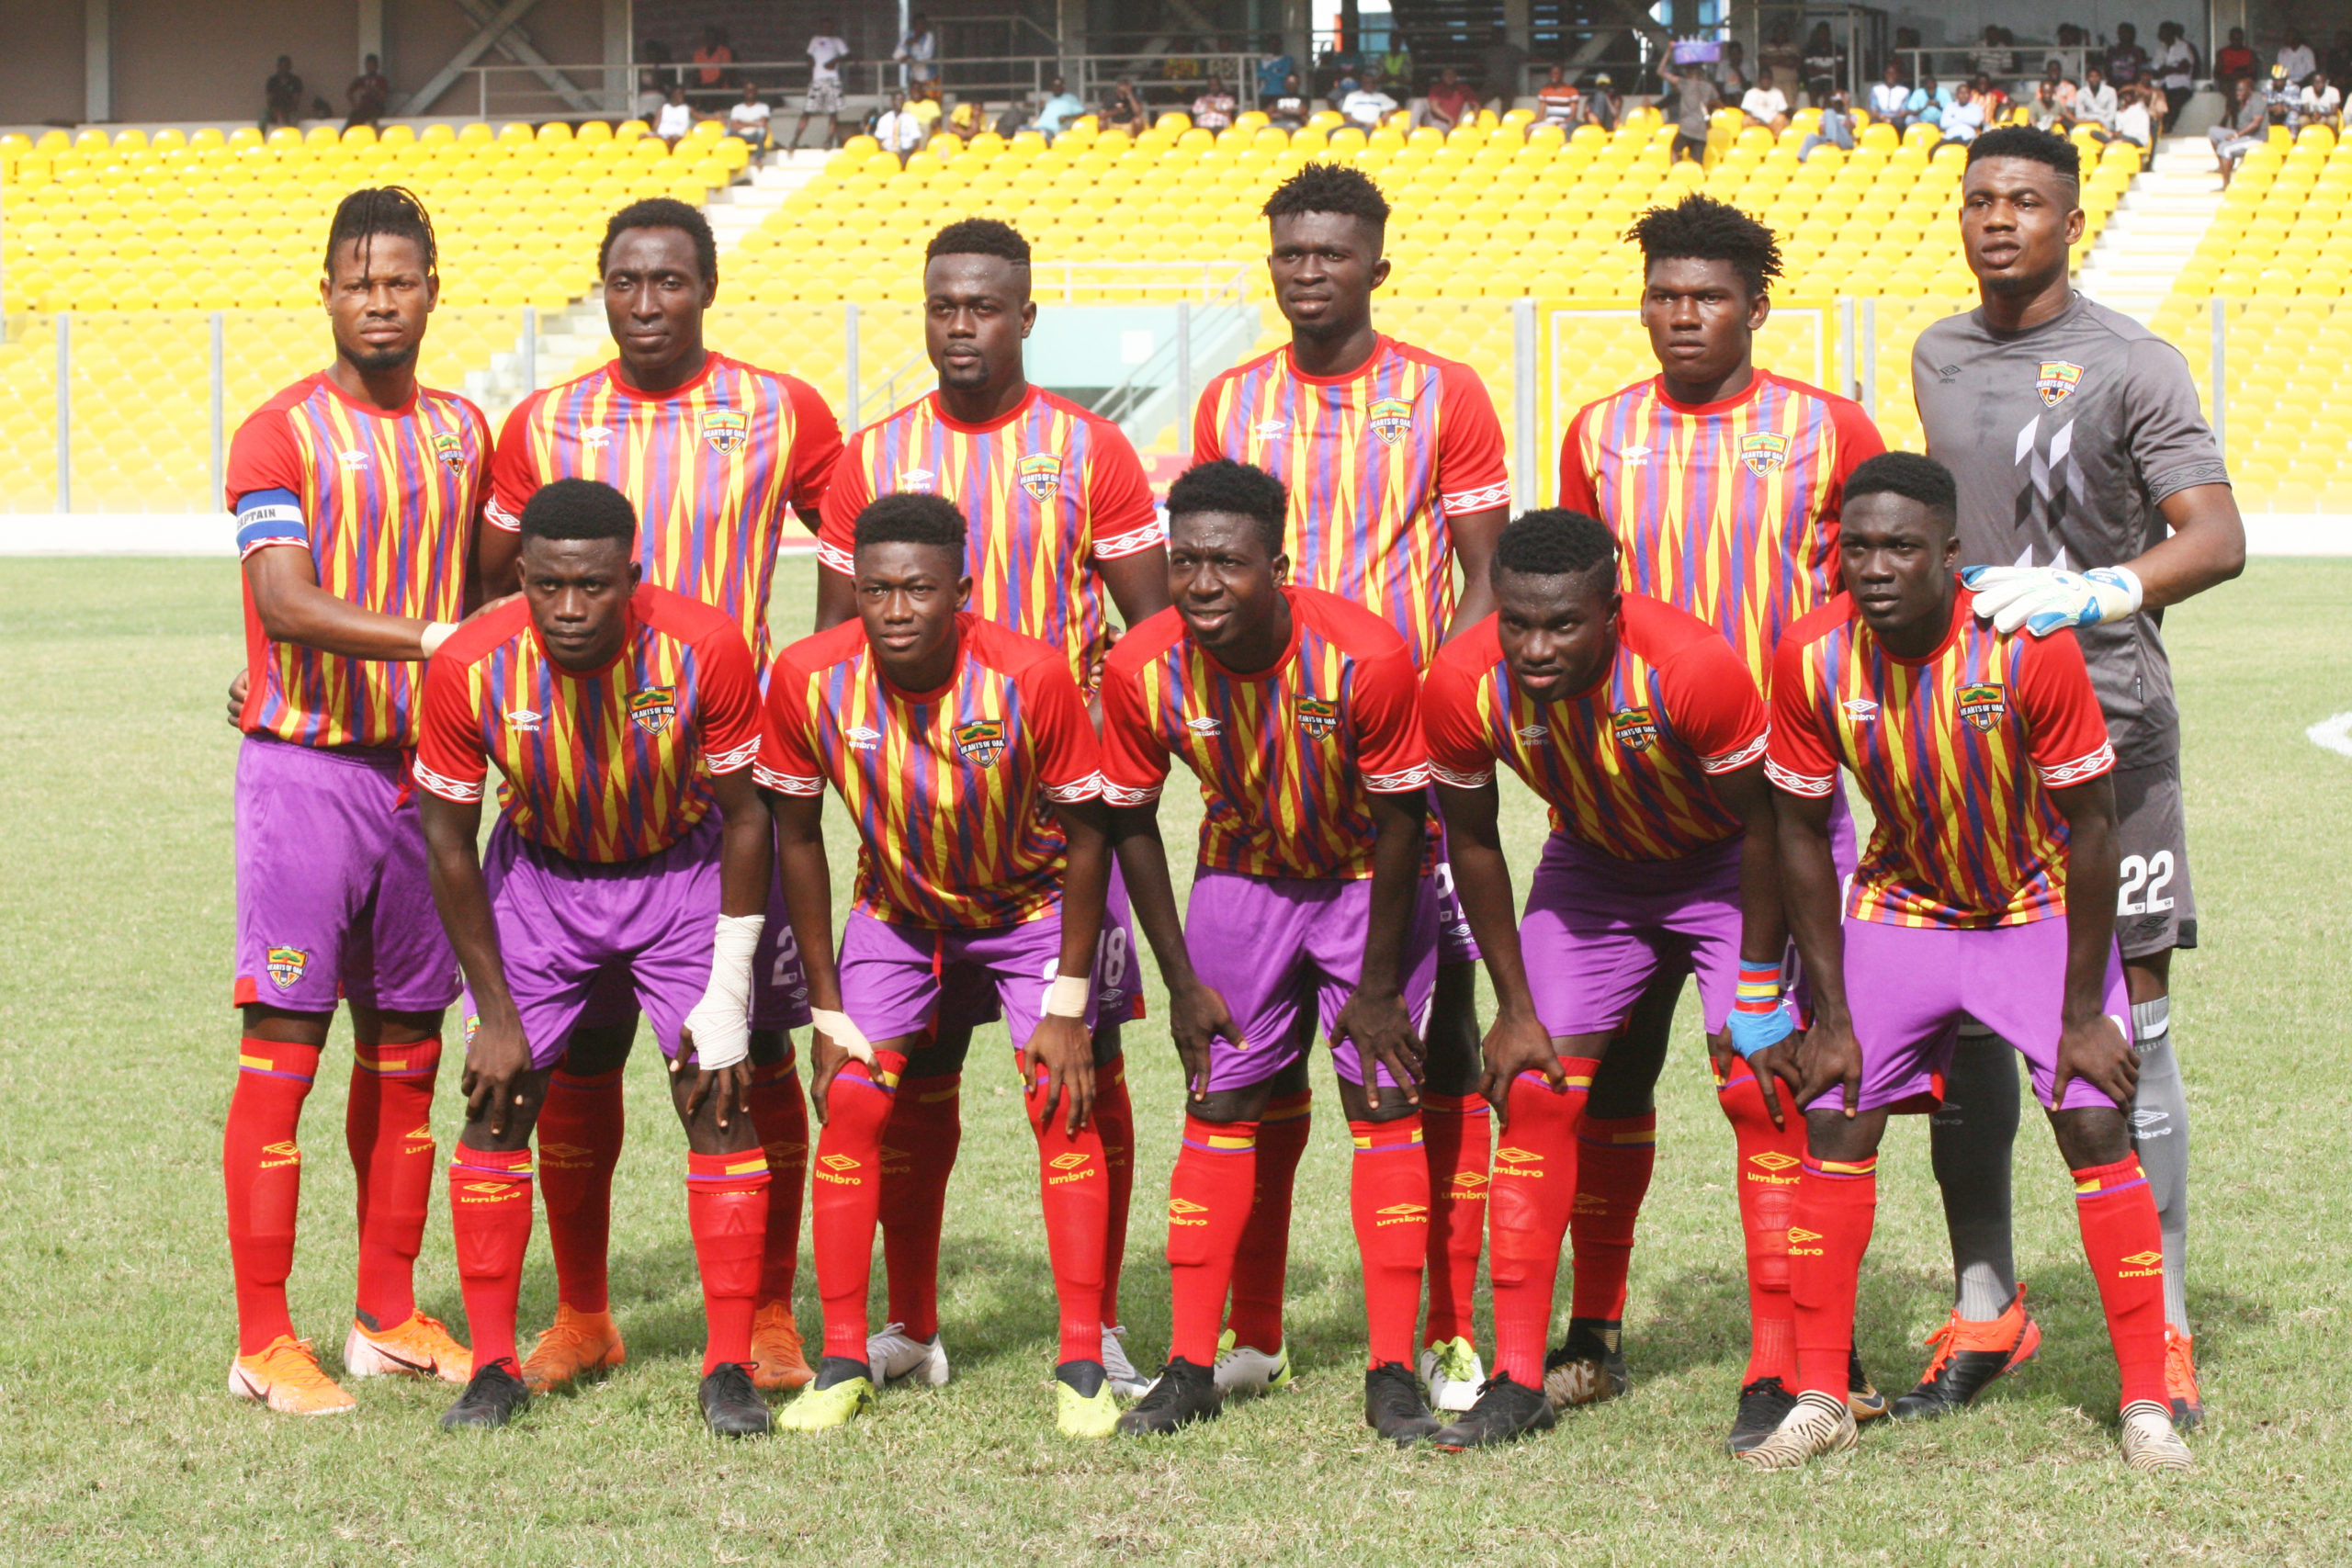 MATCH REPORT: HEARTS OF OAK SECURES FIRST AWAY VICTORY AGAINST UNITED